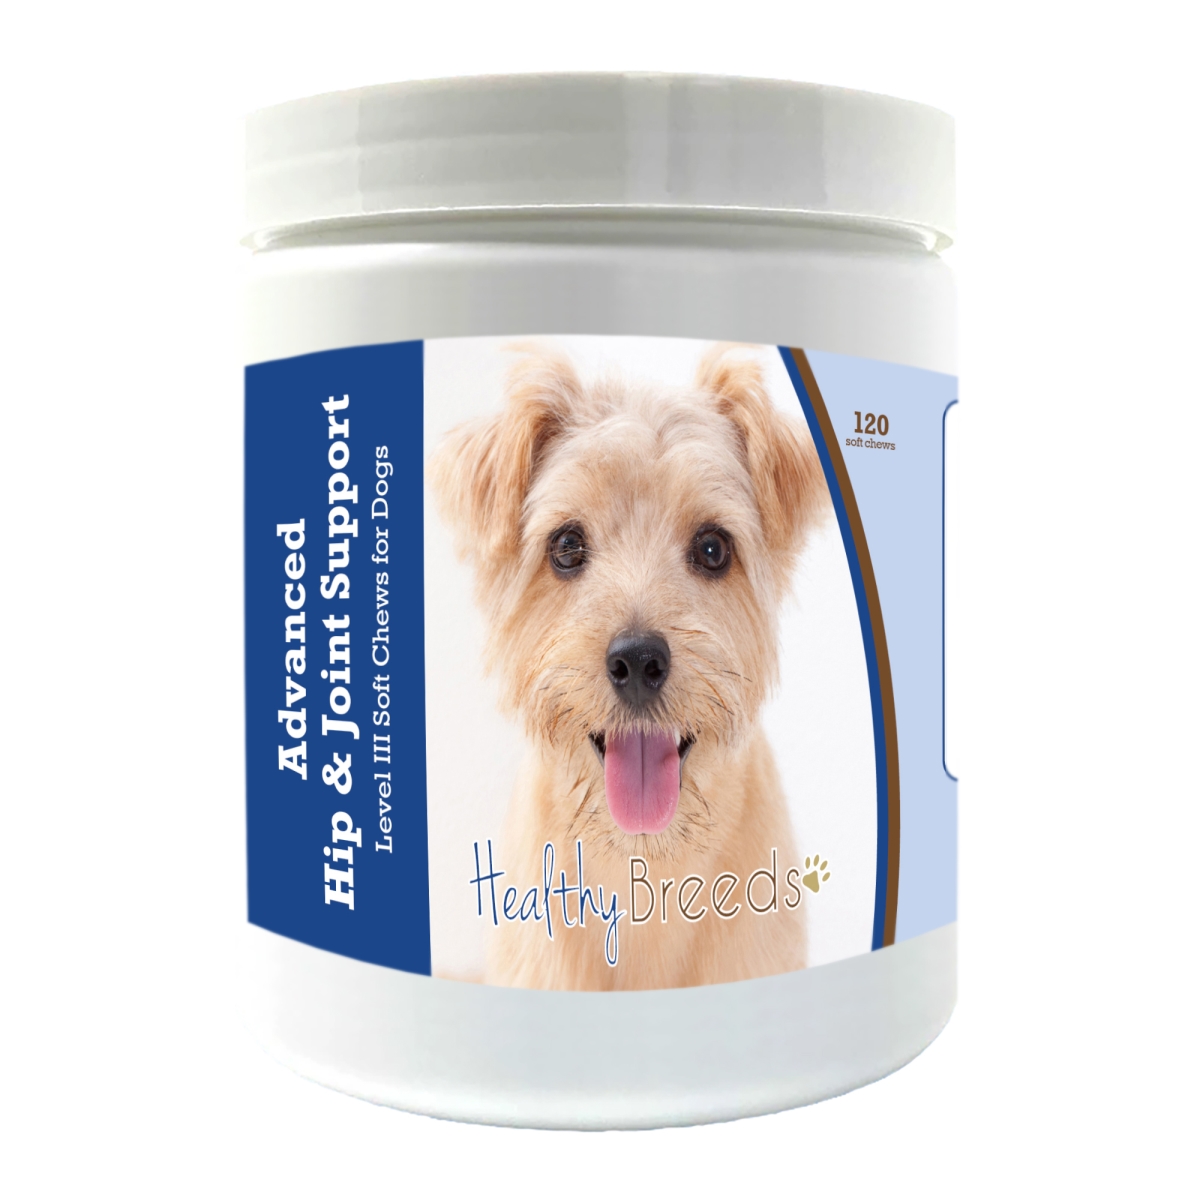 Picture of Healthy Breeds 192959898811 Norfolk Terrier Advanced Hip & Joint Support Level III Soft Chews for Dogs